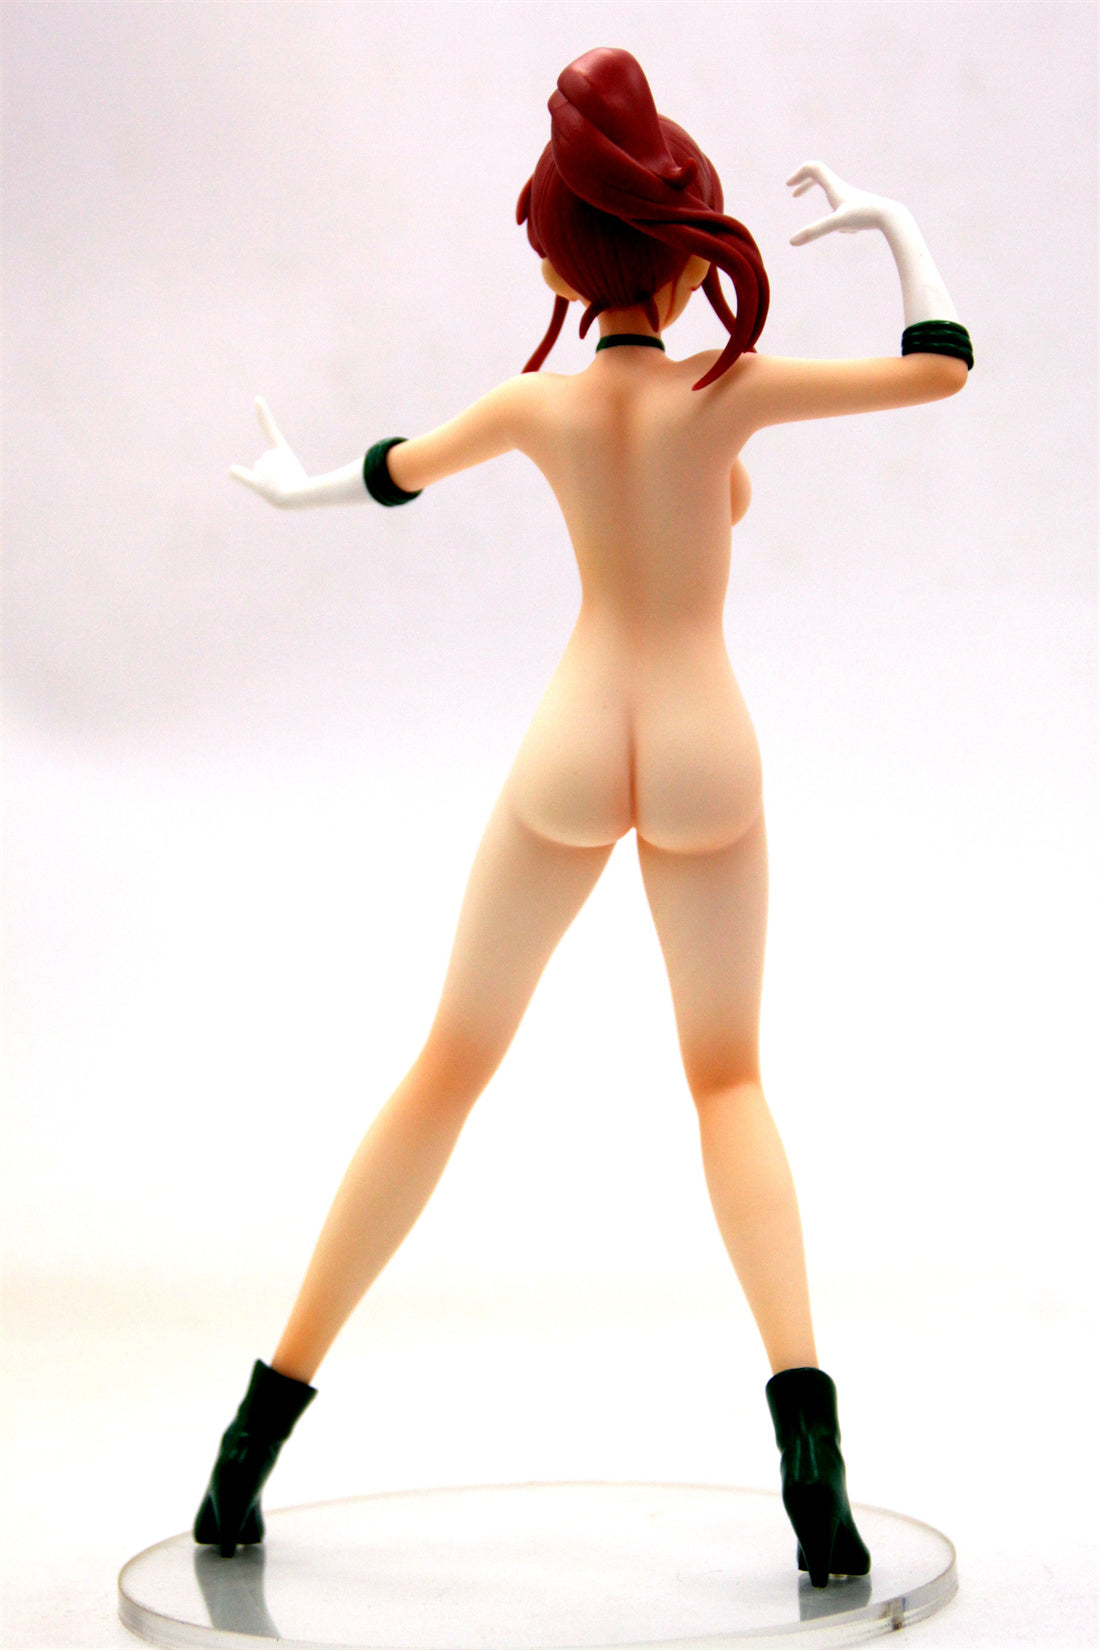 Sailor Moon Sailor Jupiter 1/6 collectible action figures naked anime figures